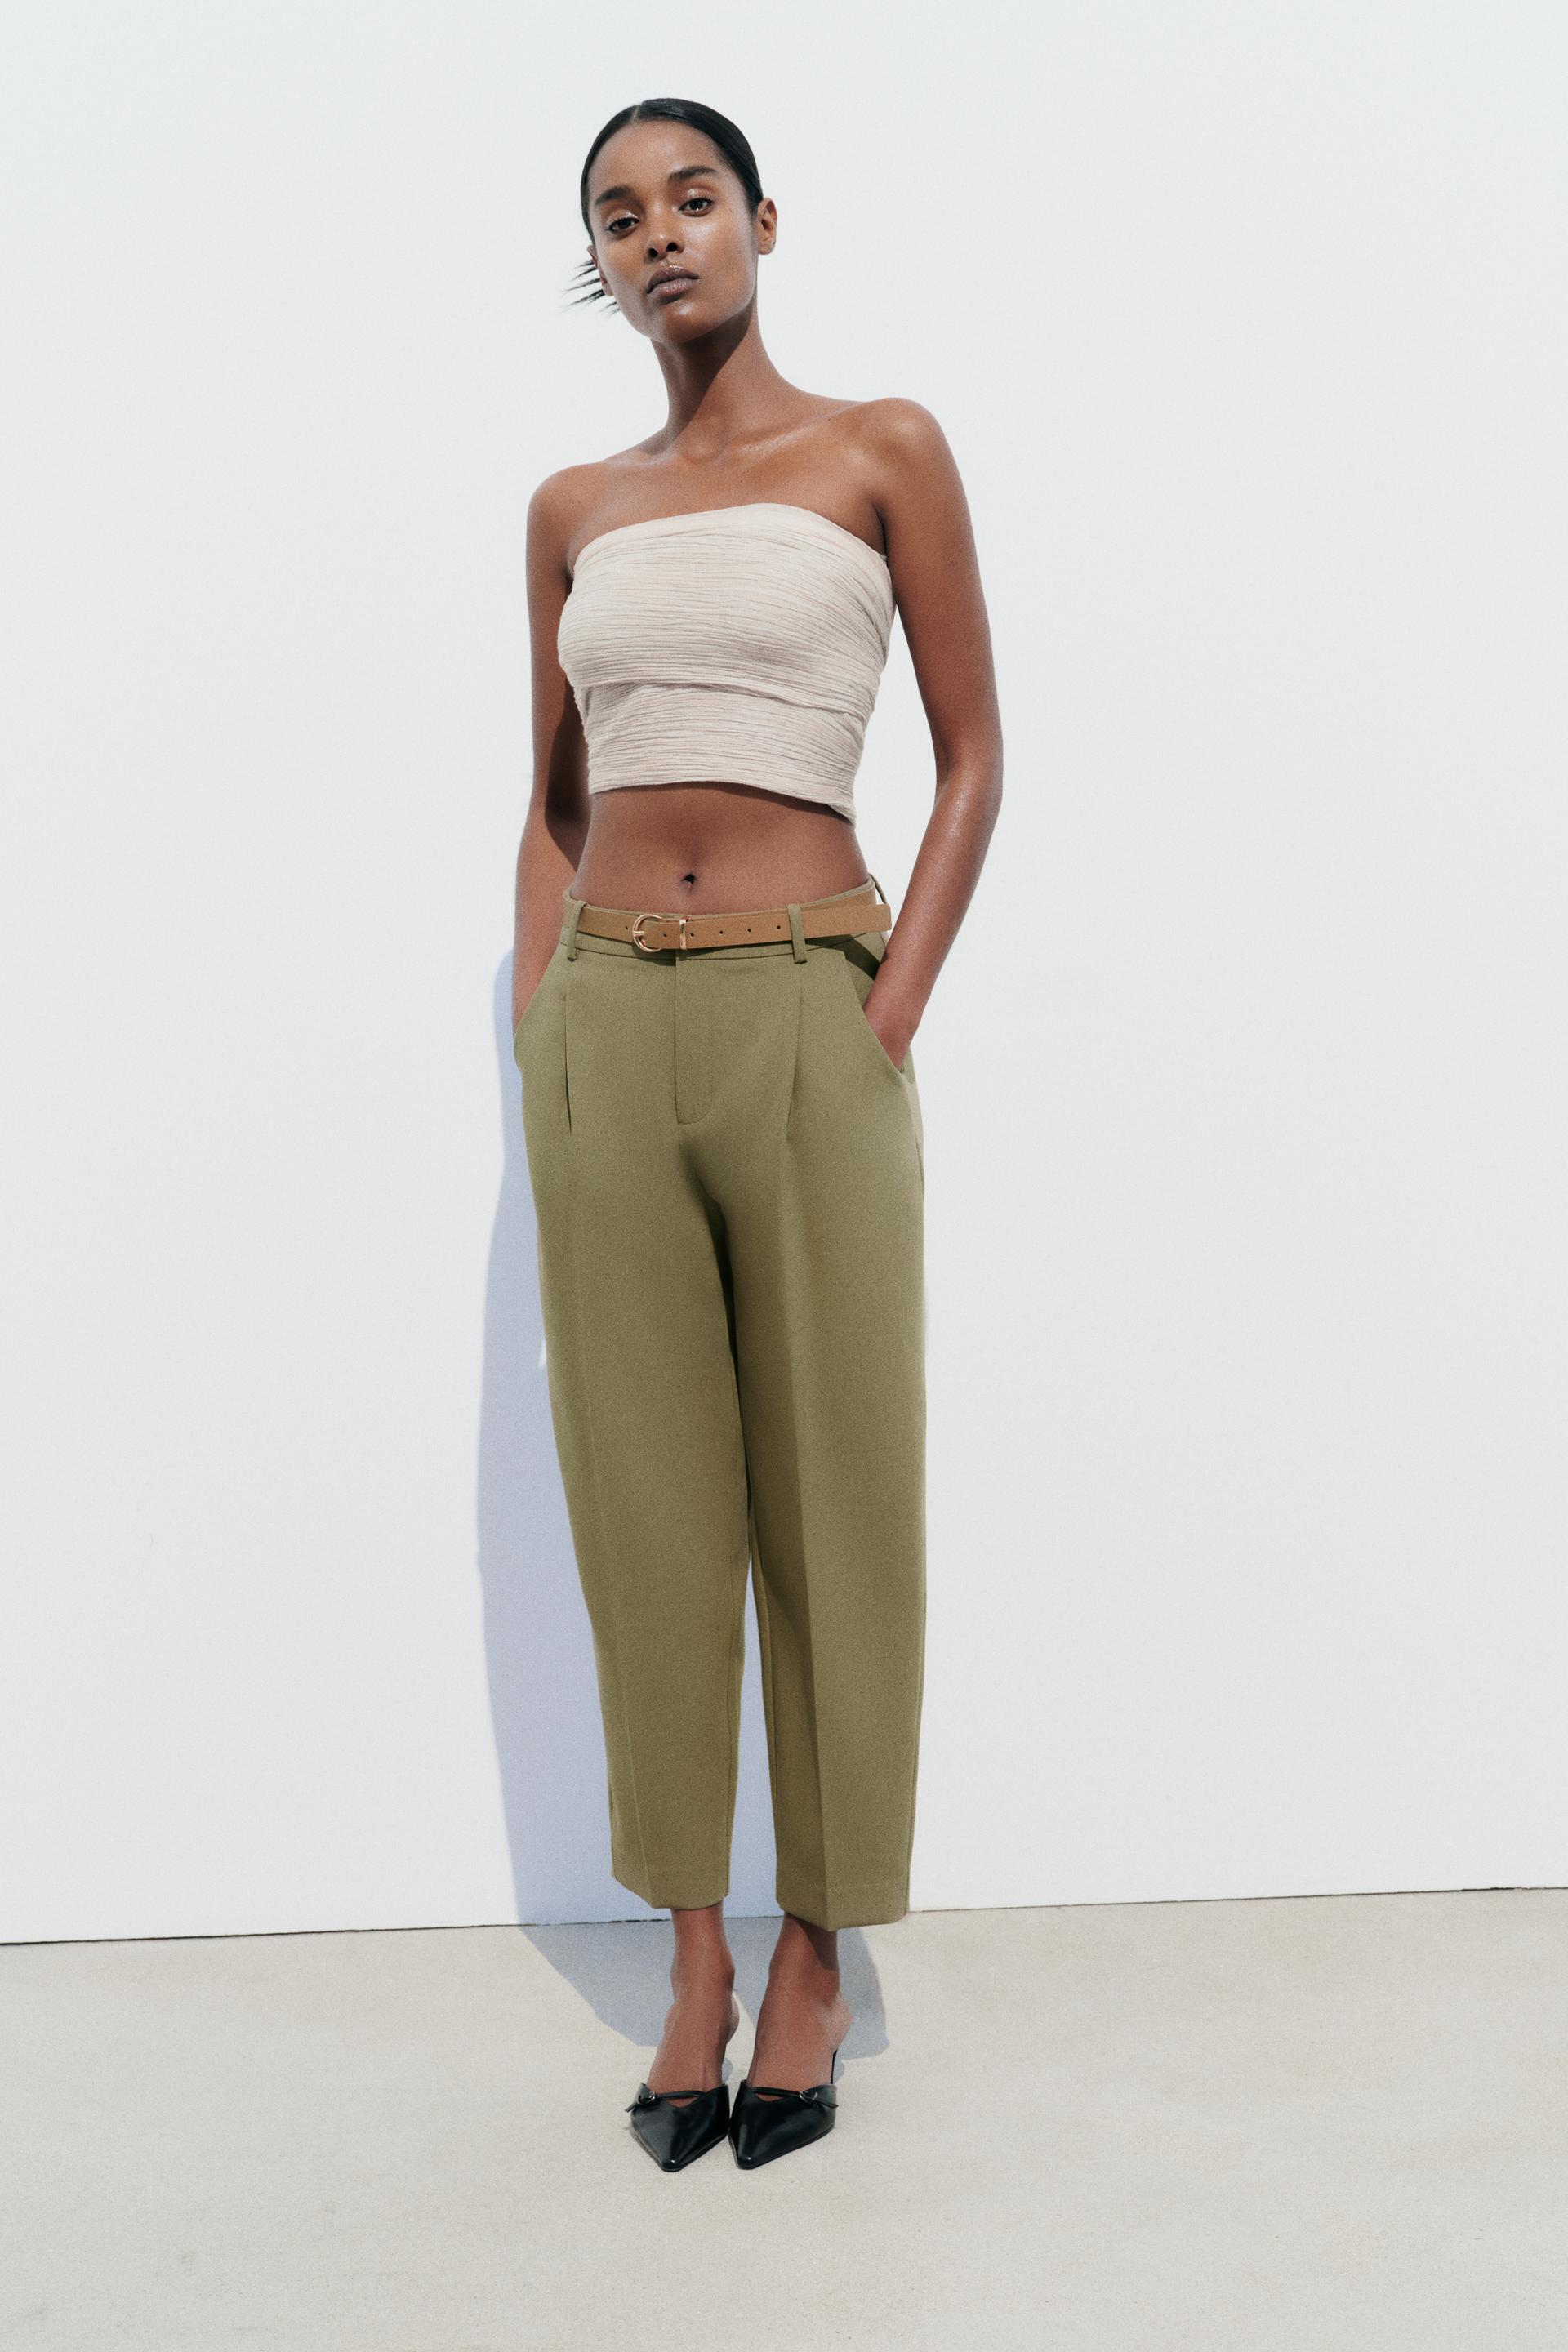 ZARA High Waisted Belted Trousers Buttoned Pants with Belt Medium